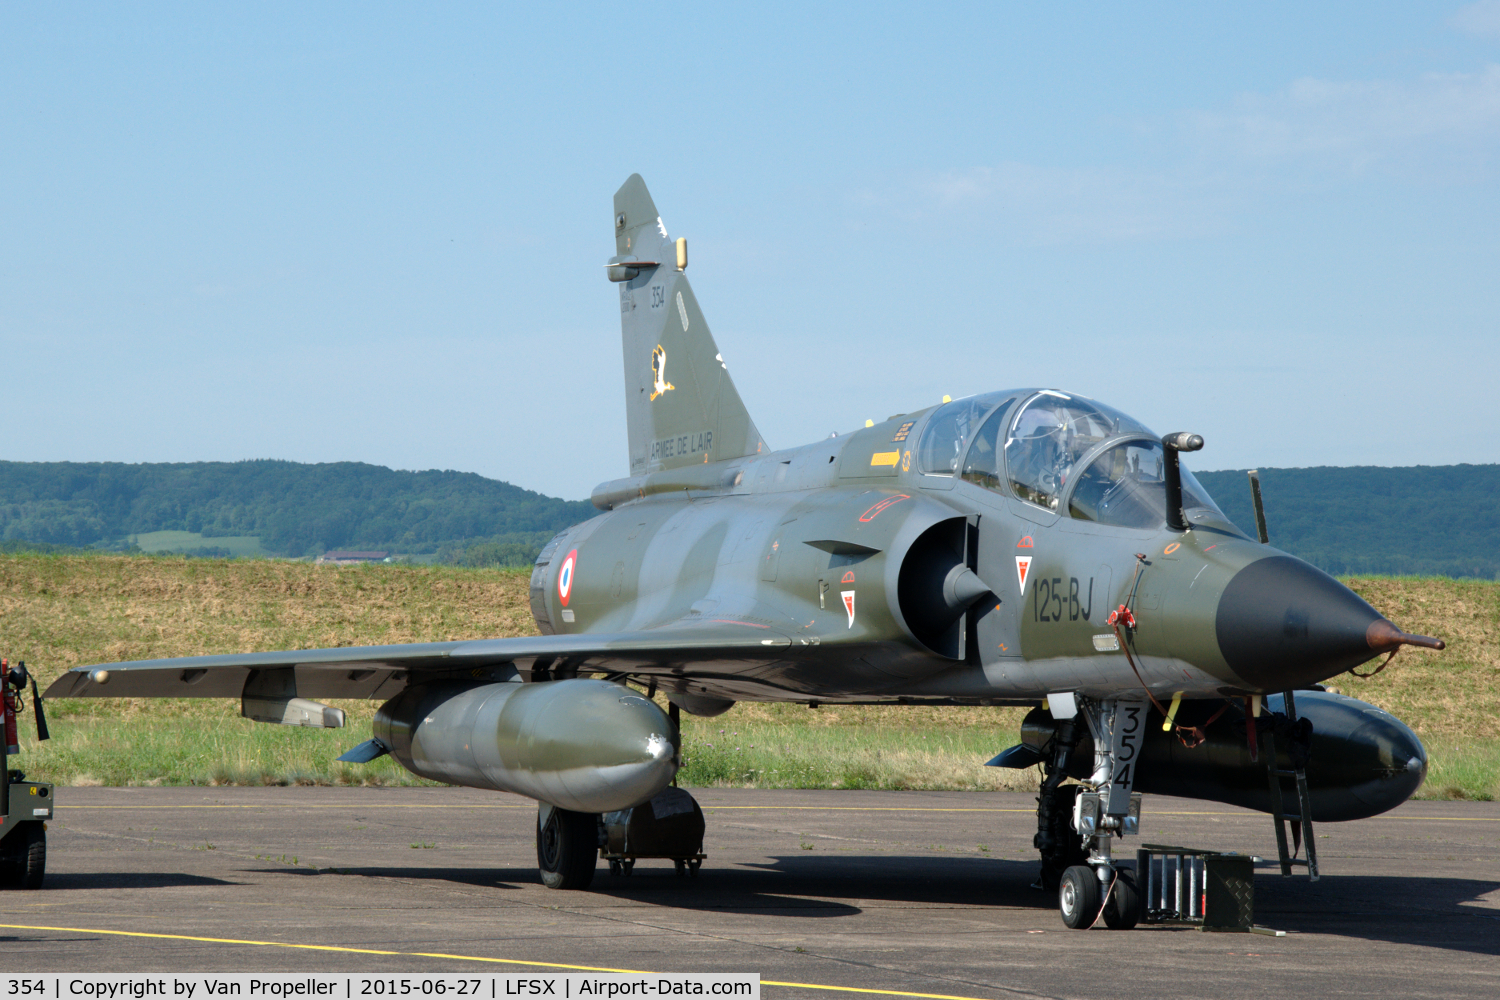 354, Dassault Mirage 2000N C/N 319, Dassault Mirage 2000N fighter of the French Air Force Ramex Delta team on the flightline of Luxeuil Air base, France.